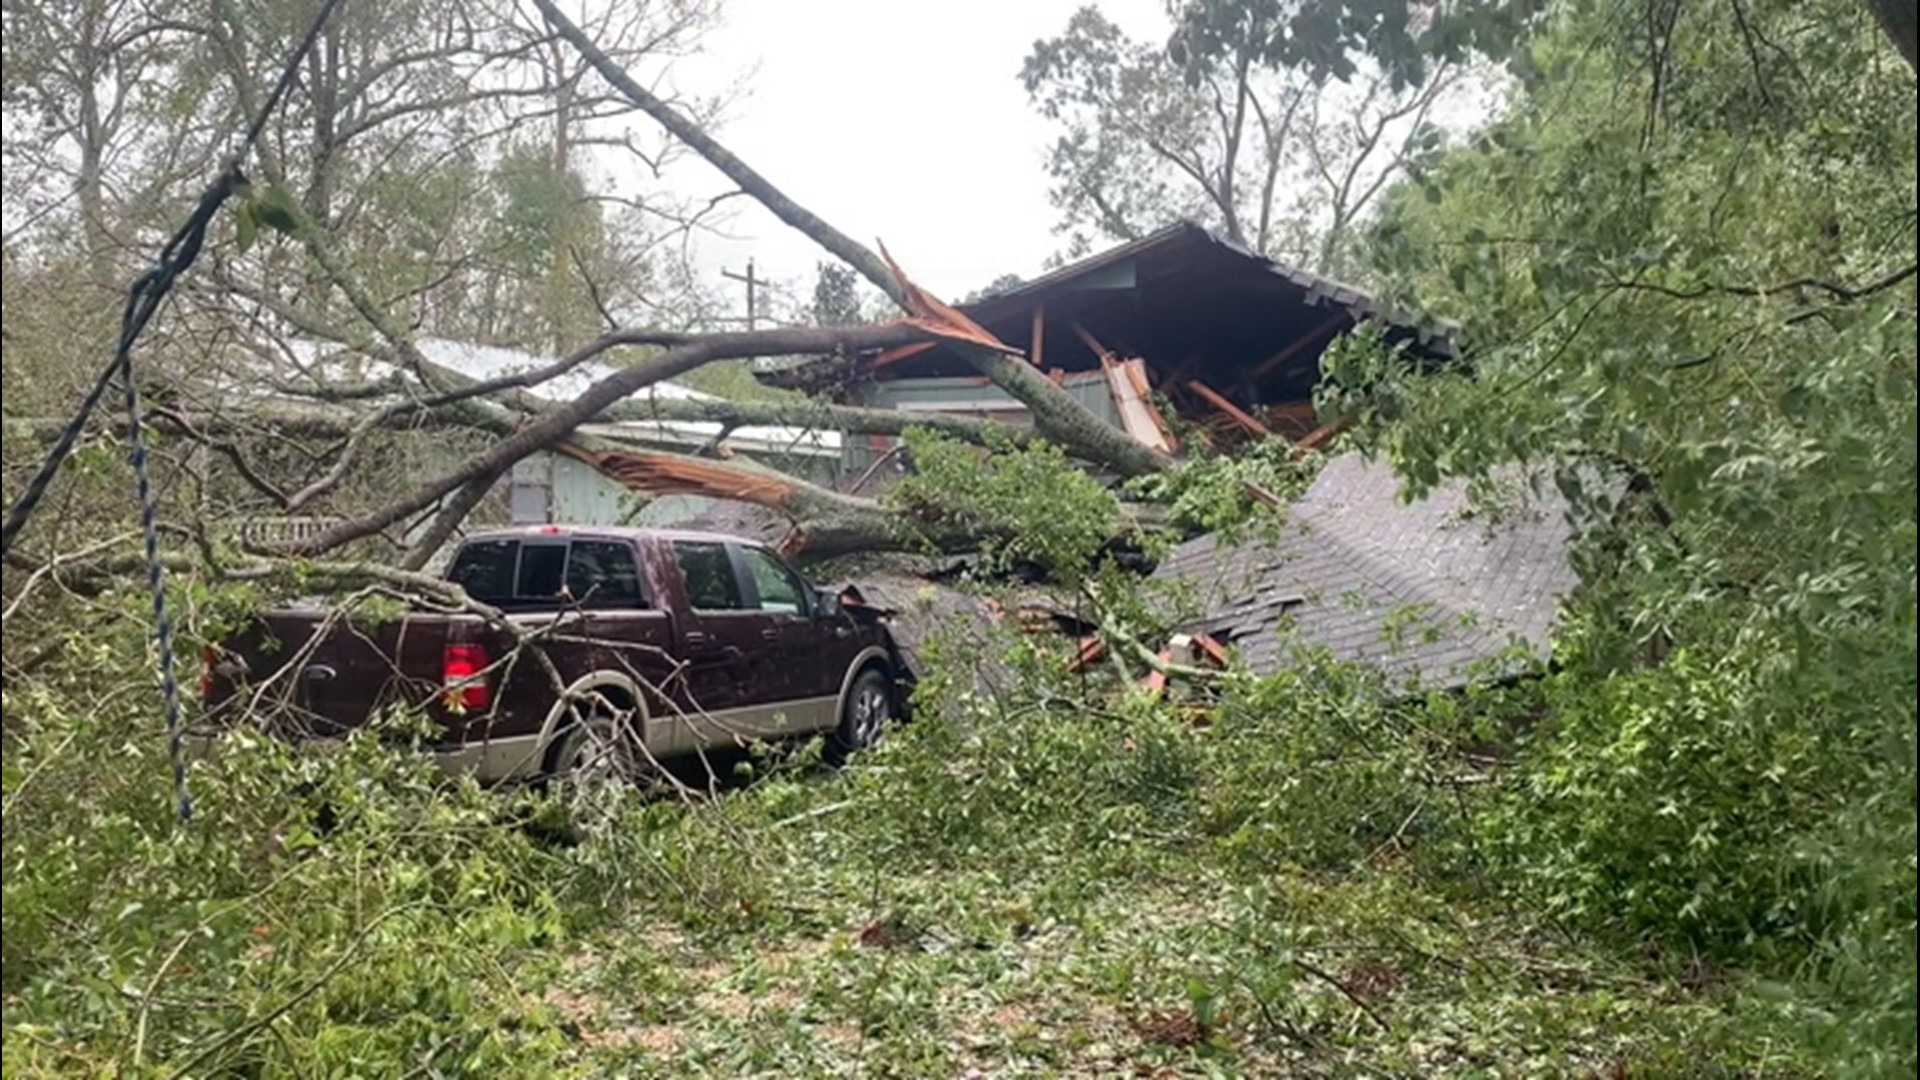 Hurricane Sally caused extensive damage in Foley, Alabama, on Sept. 16 such as trees being ripped out of the ground and buildings being torn to shreds.